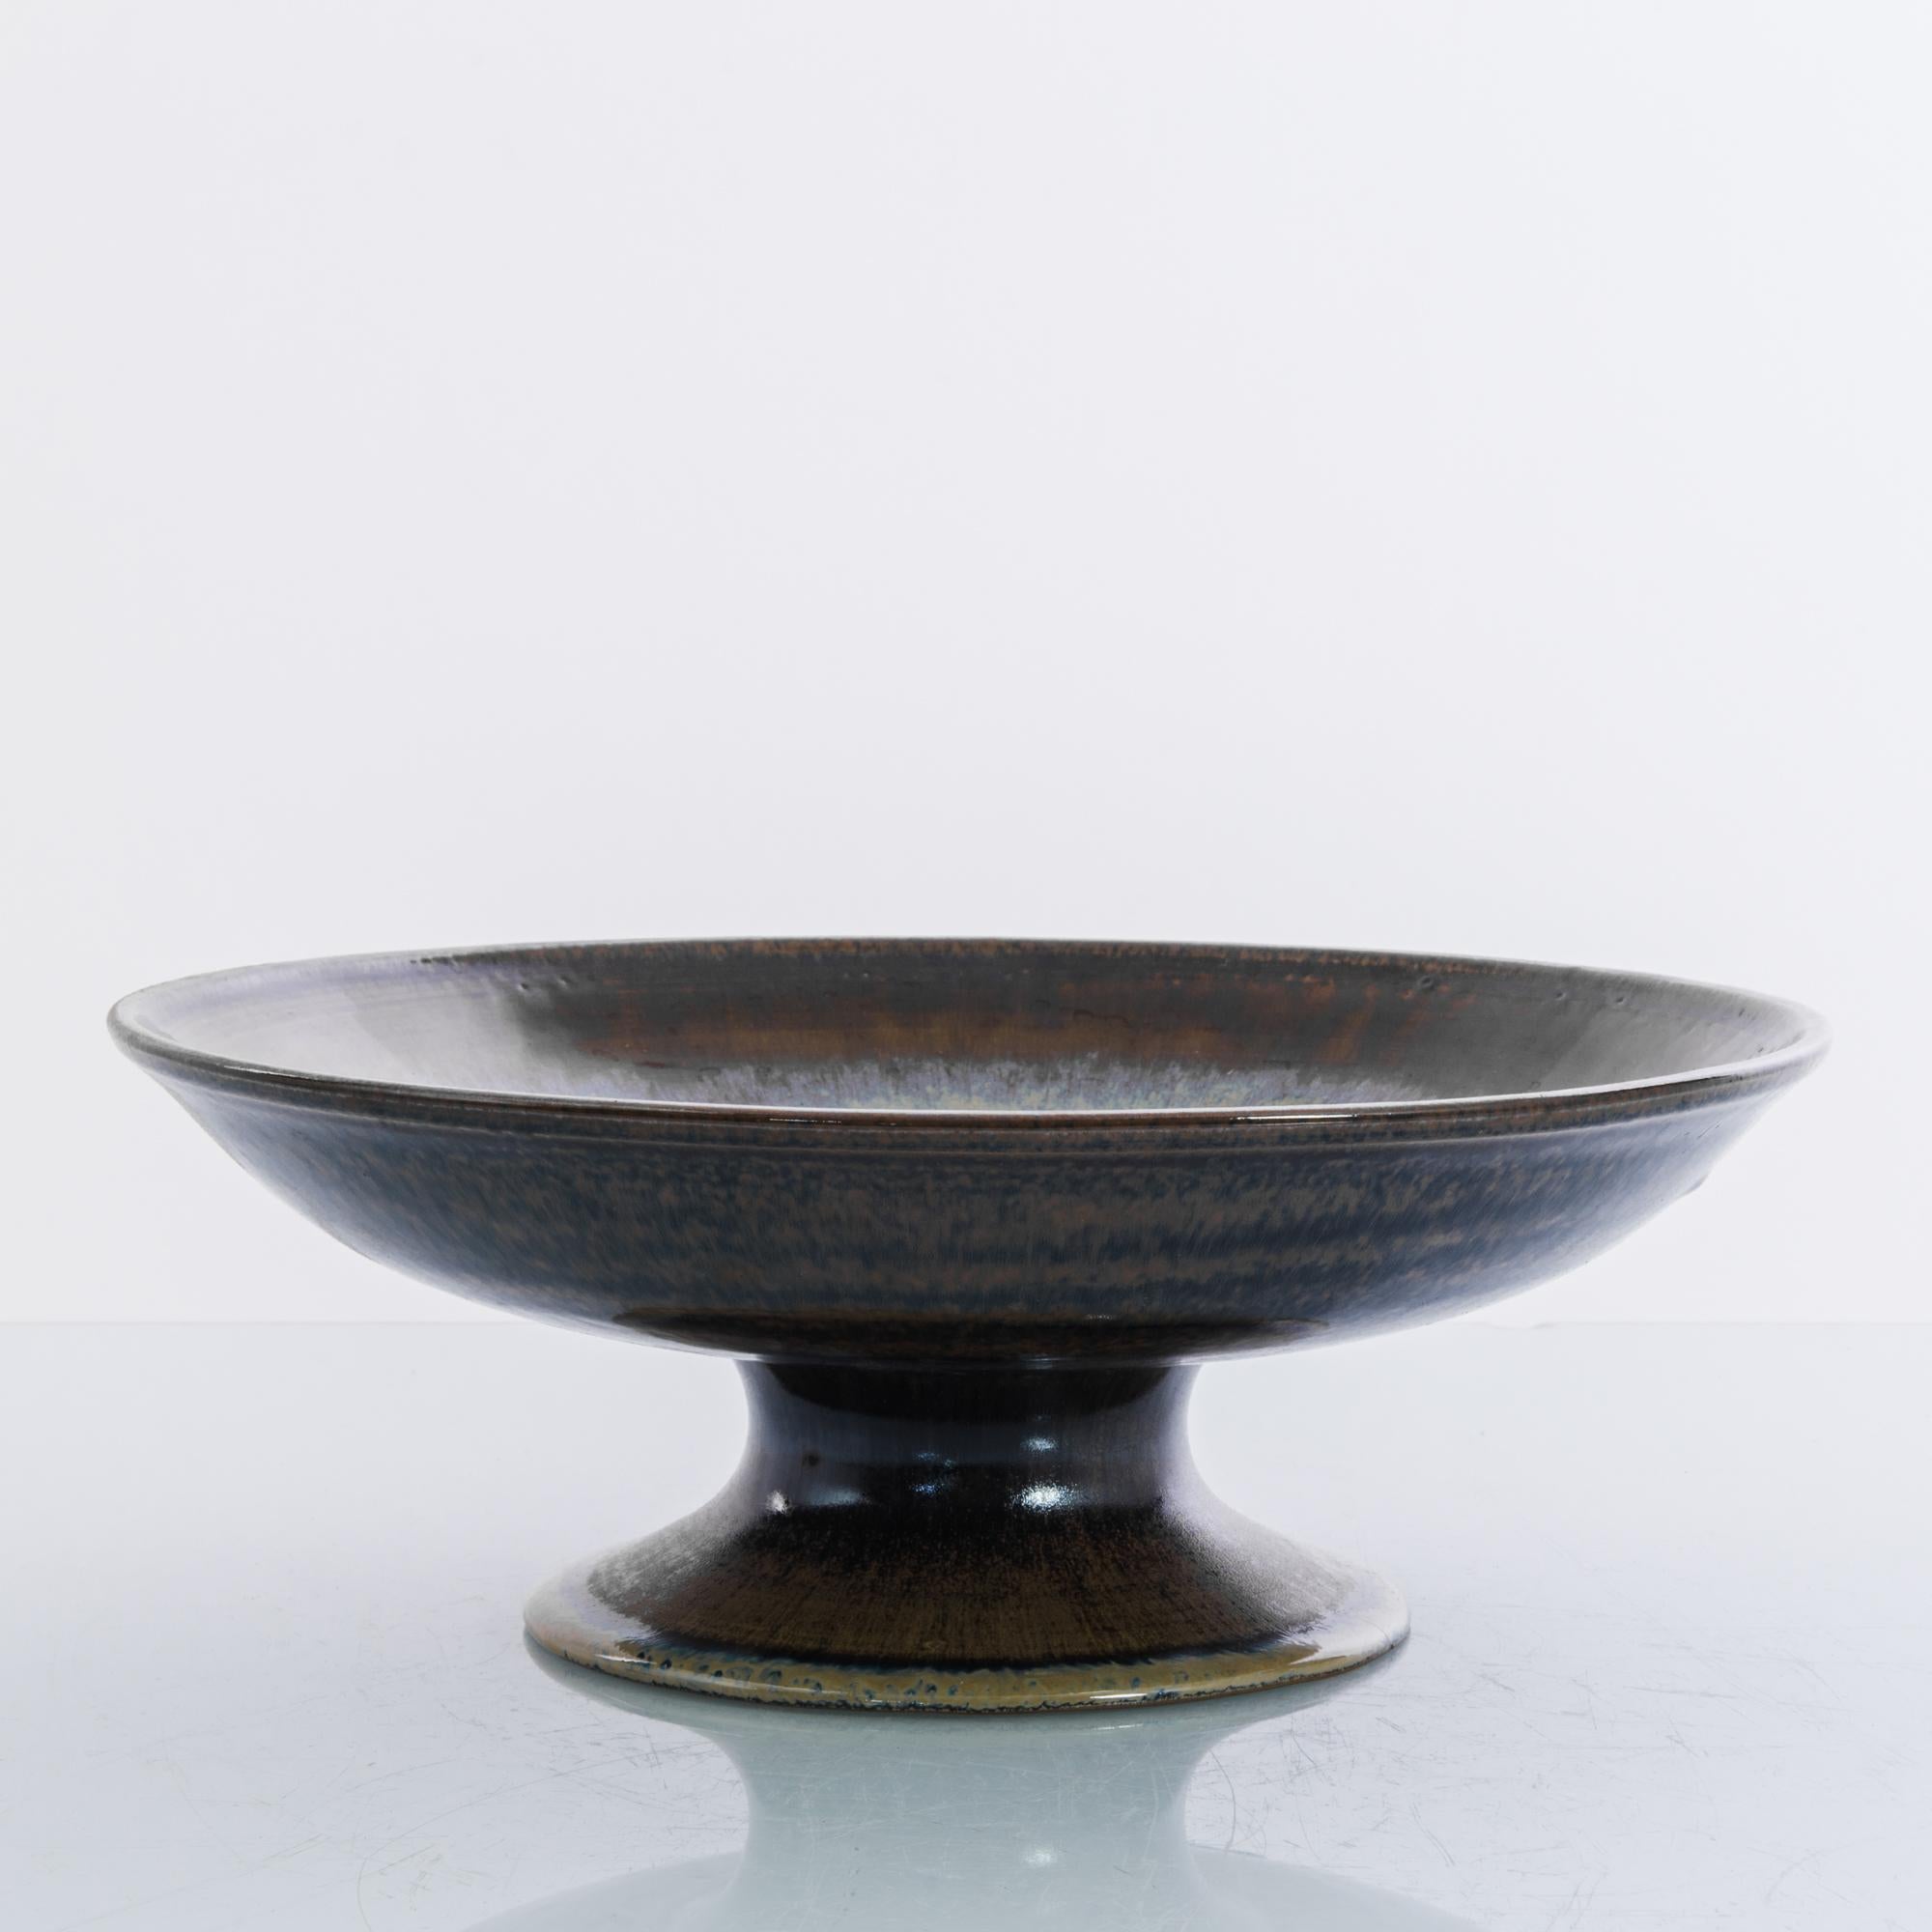 A ceramic fruit bowl from Europe, circa 1970. This decorative bowl is dressed in soothing earth tones. High quality stoneware, with distinctive color schemes, graphic patterns and textures, this characteristic mid-century fashion expanded the